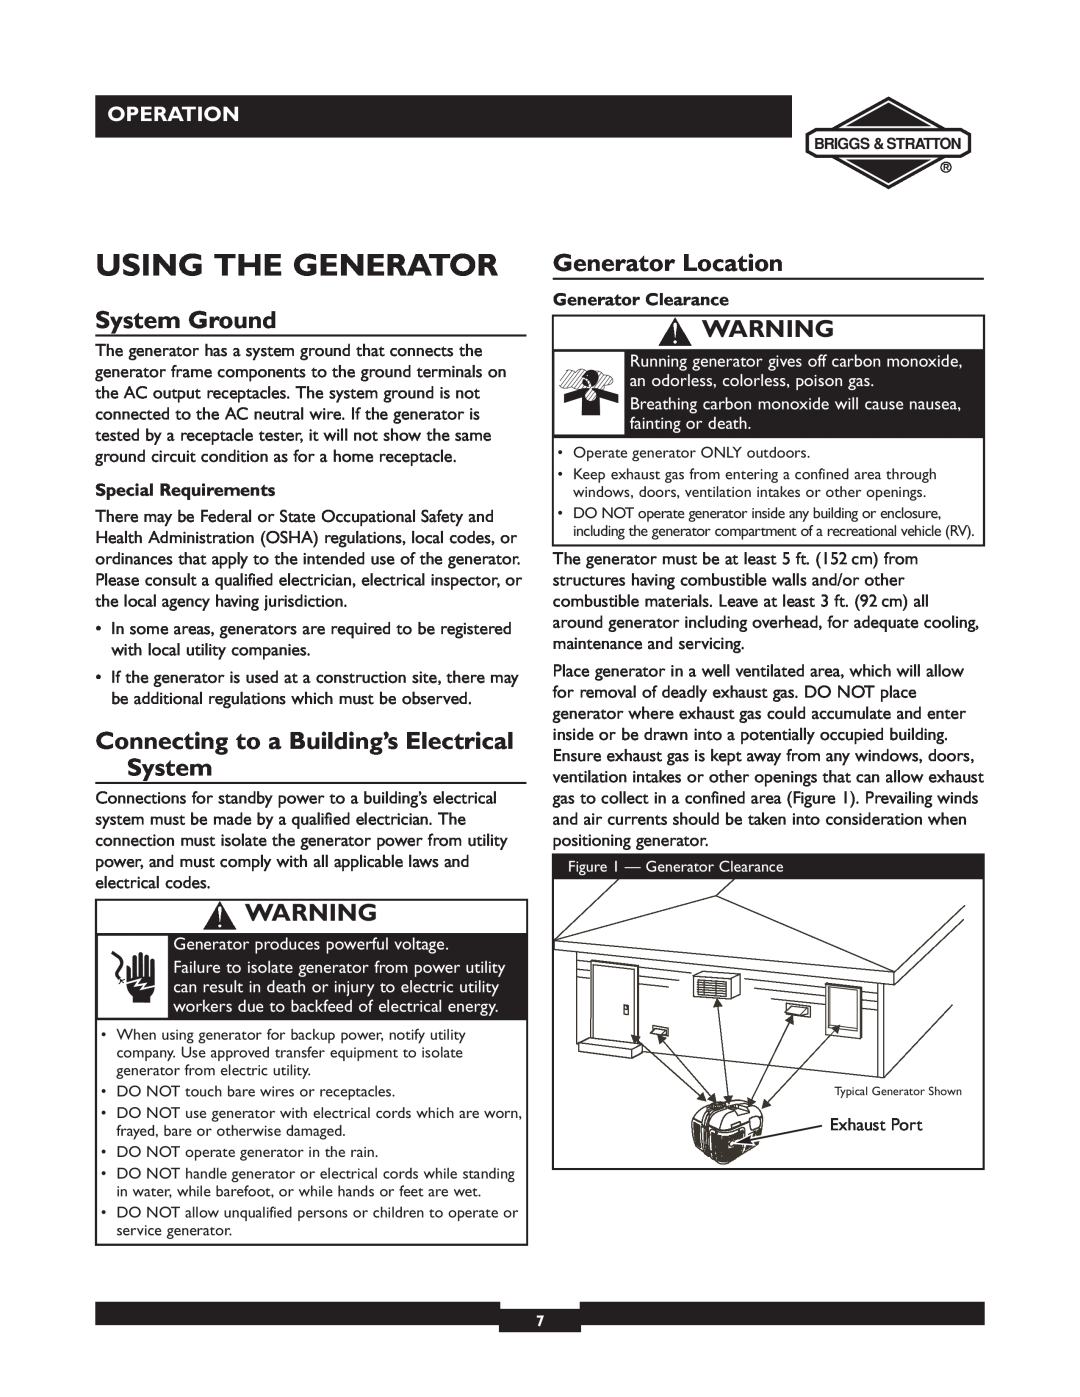 Briggs & Stratton 01532-4 Using The Generator, System Ground, Connecting to a Building’s Electrical System, Operation 